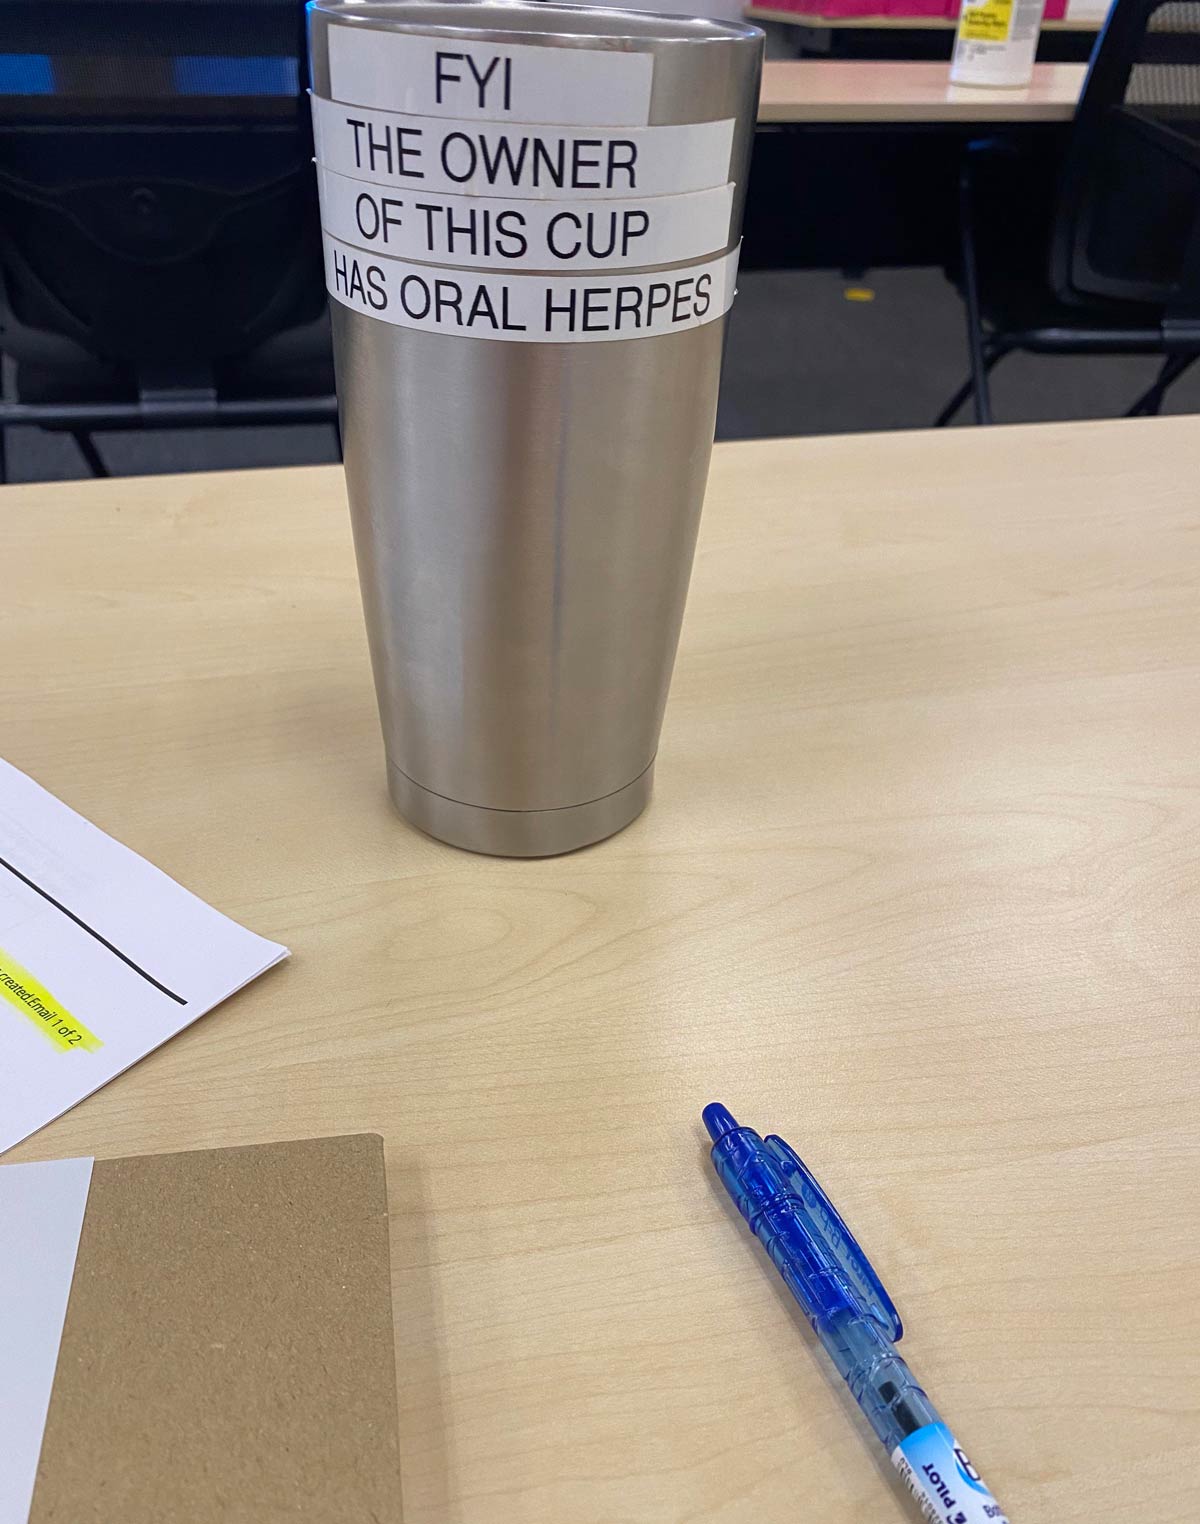 My dad said people at work wouldn’t stop using his personal cup, so this was his solution